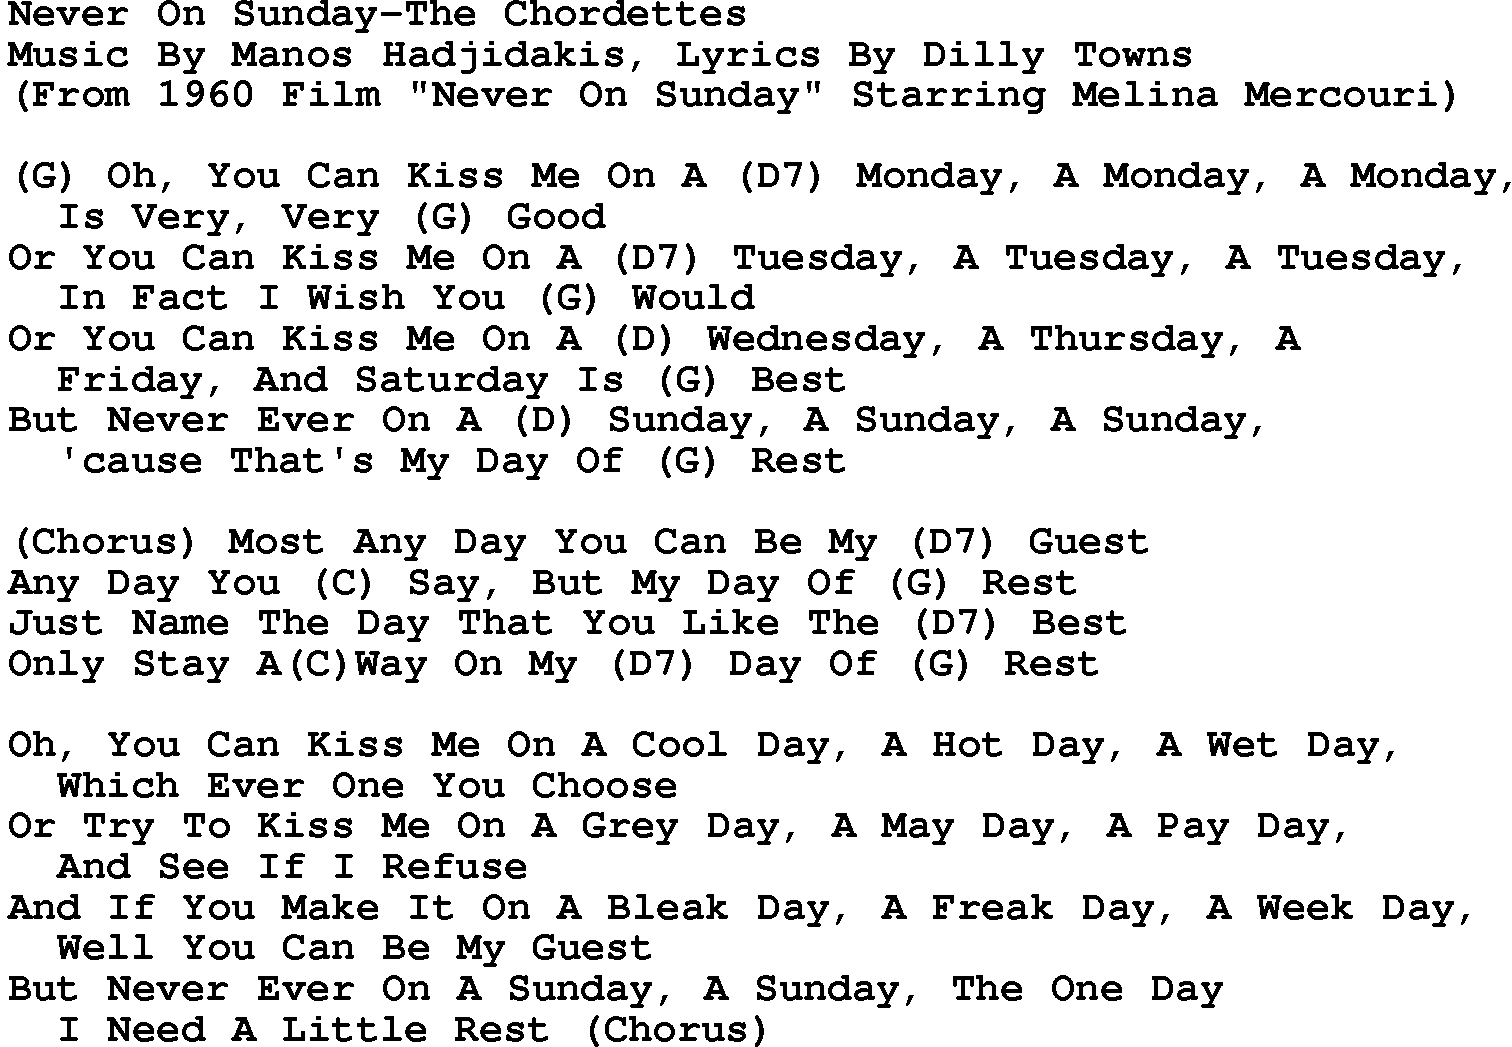 Country music song: Never On Sunday-The Chordettes lyrics and chords